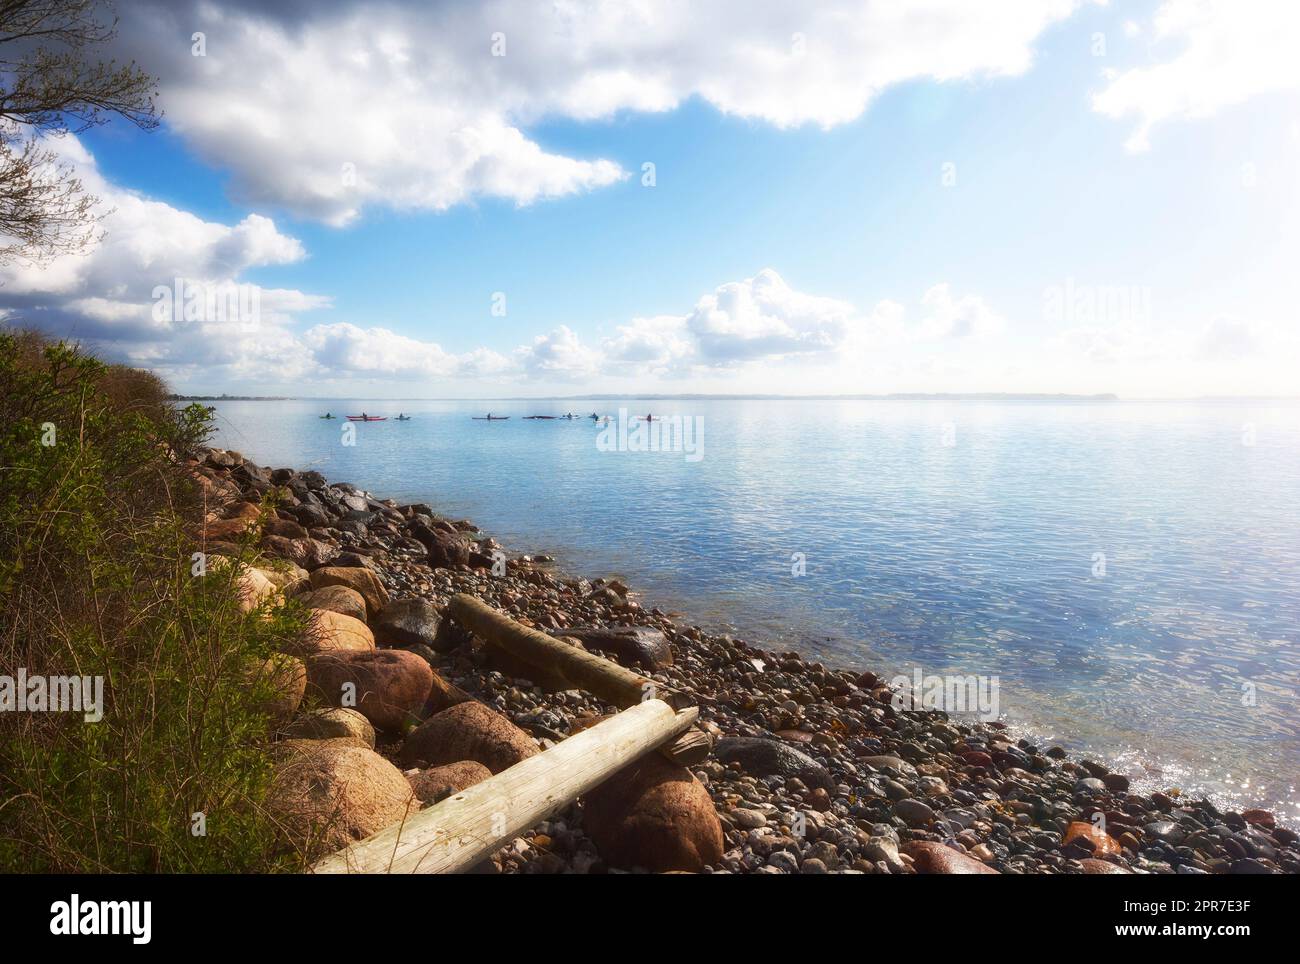 Copyspace at sea with a rocky shore and cloudy sky background. Calm ocean waves at a coast with kayaks cruising in the horizon. Scenic and picturesque landscape view for a peaceful summer holiday Stock Photo